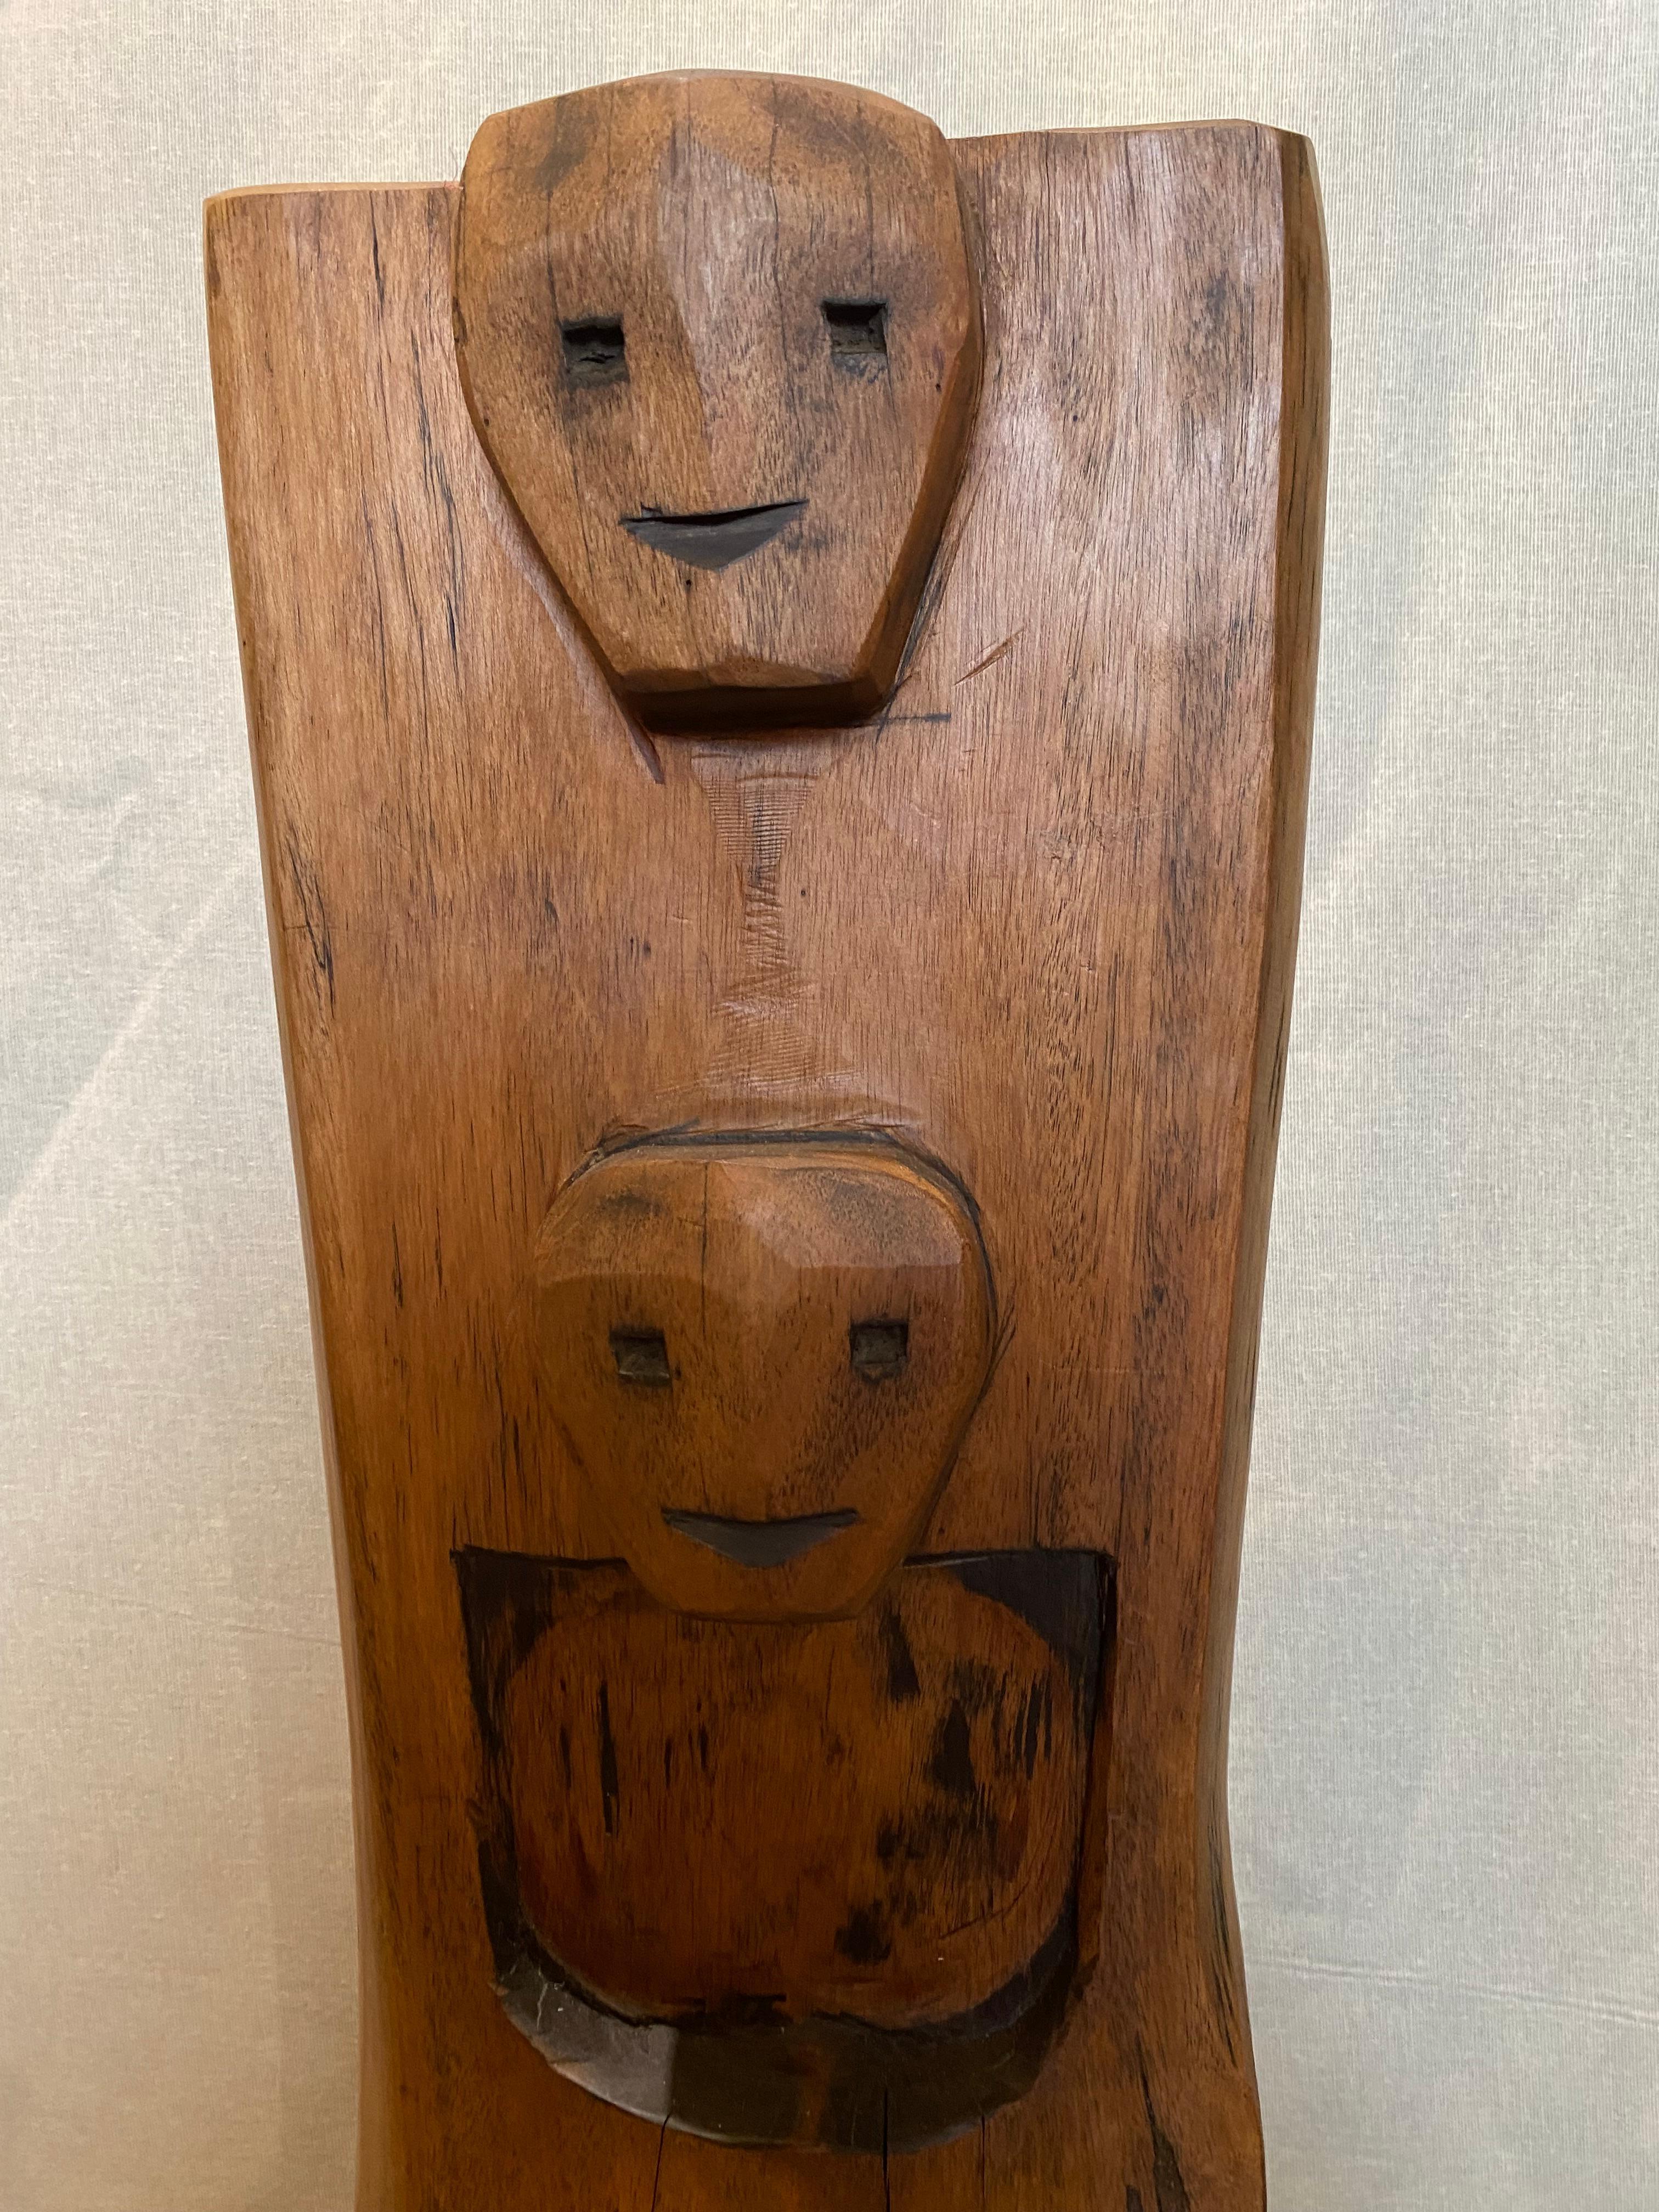 totem panel from Nagaland.
the Naga people lives on the Indo-Burmese border. head-cutter people they make their own furniture by digging tree trunks giving a refined and brutalist style
the foot has been added but can be removed for hanging on the